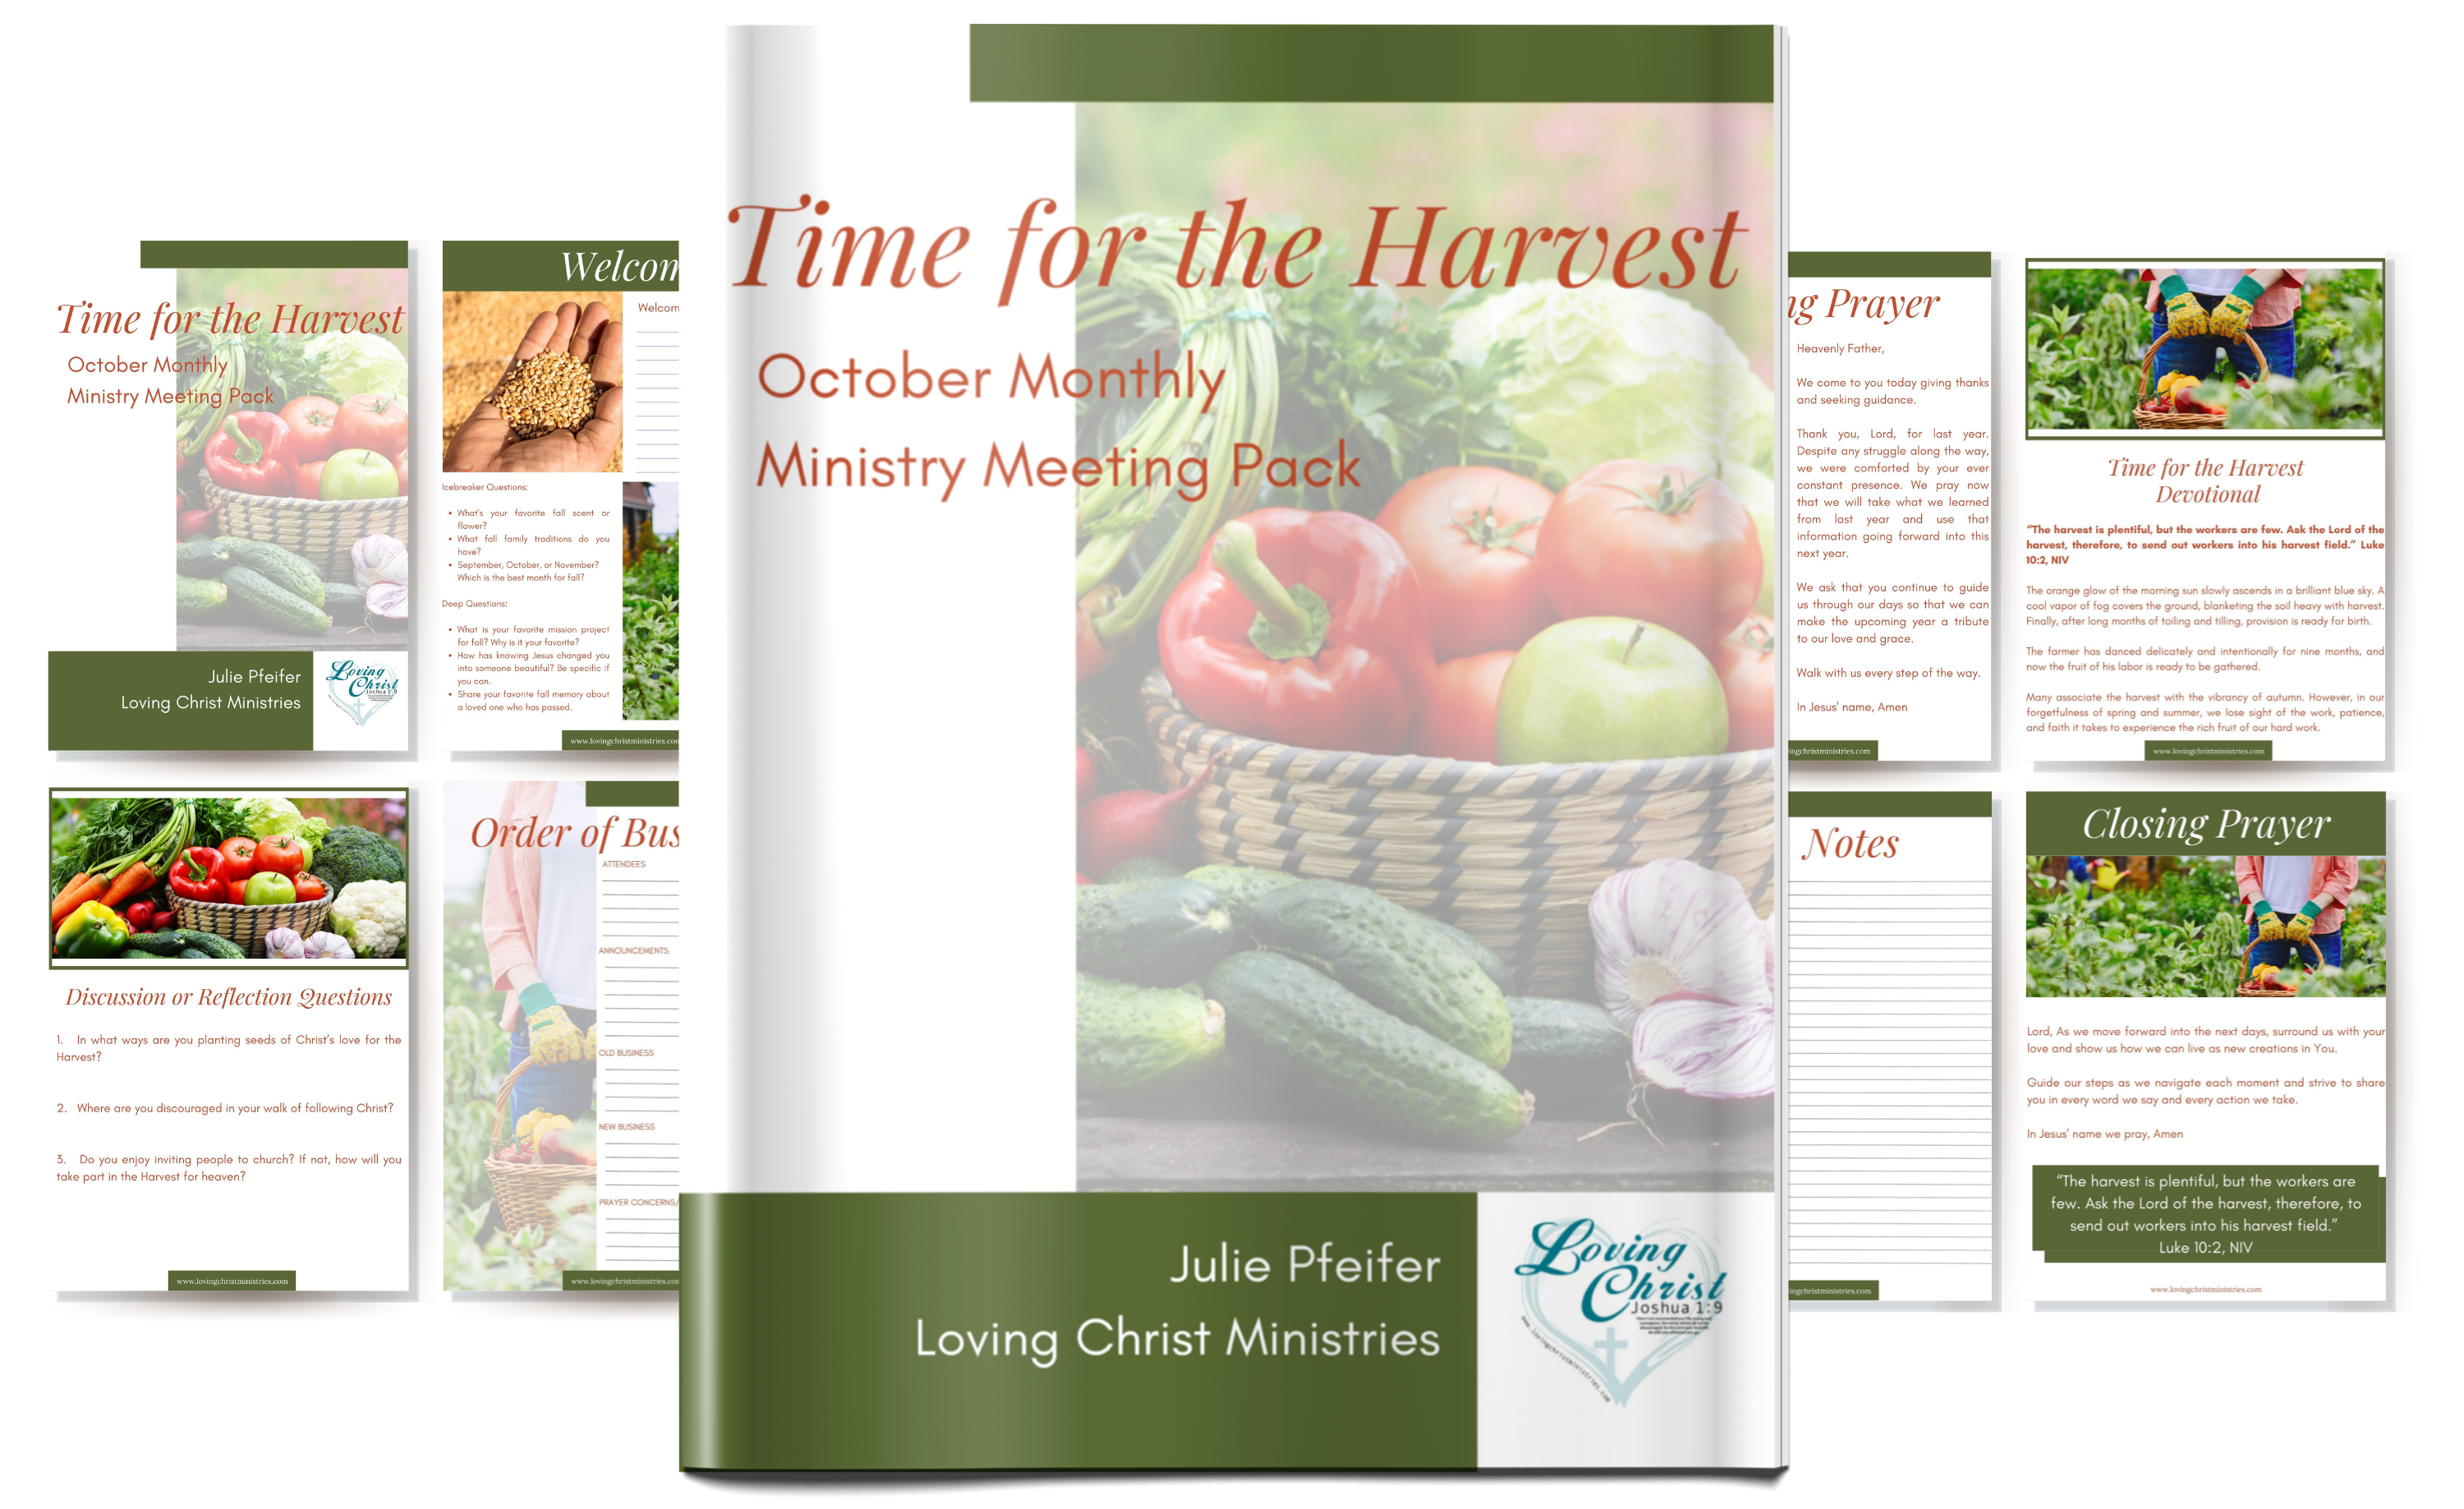 October Monthly Ministry Meeting Pack - Time for the Harvest